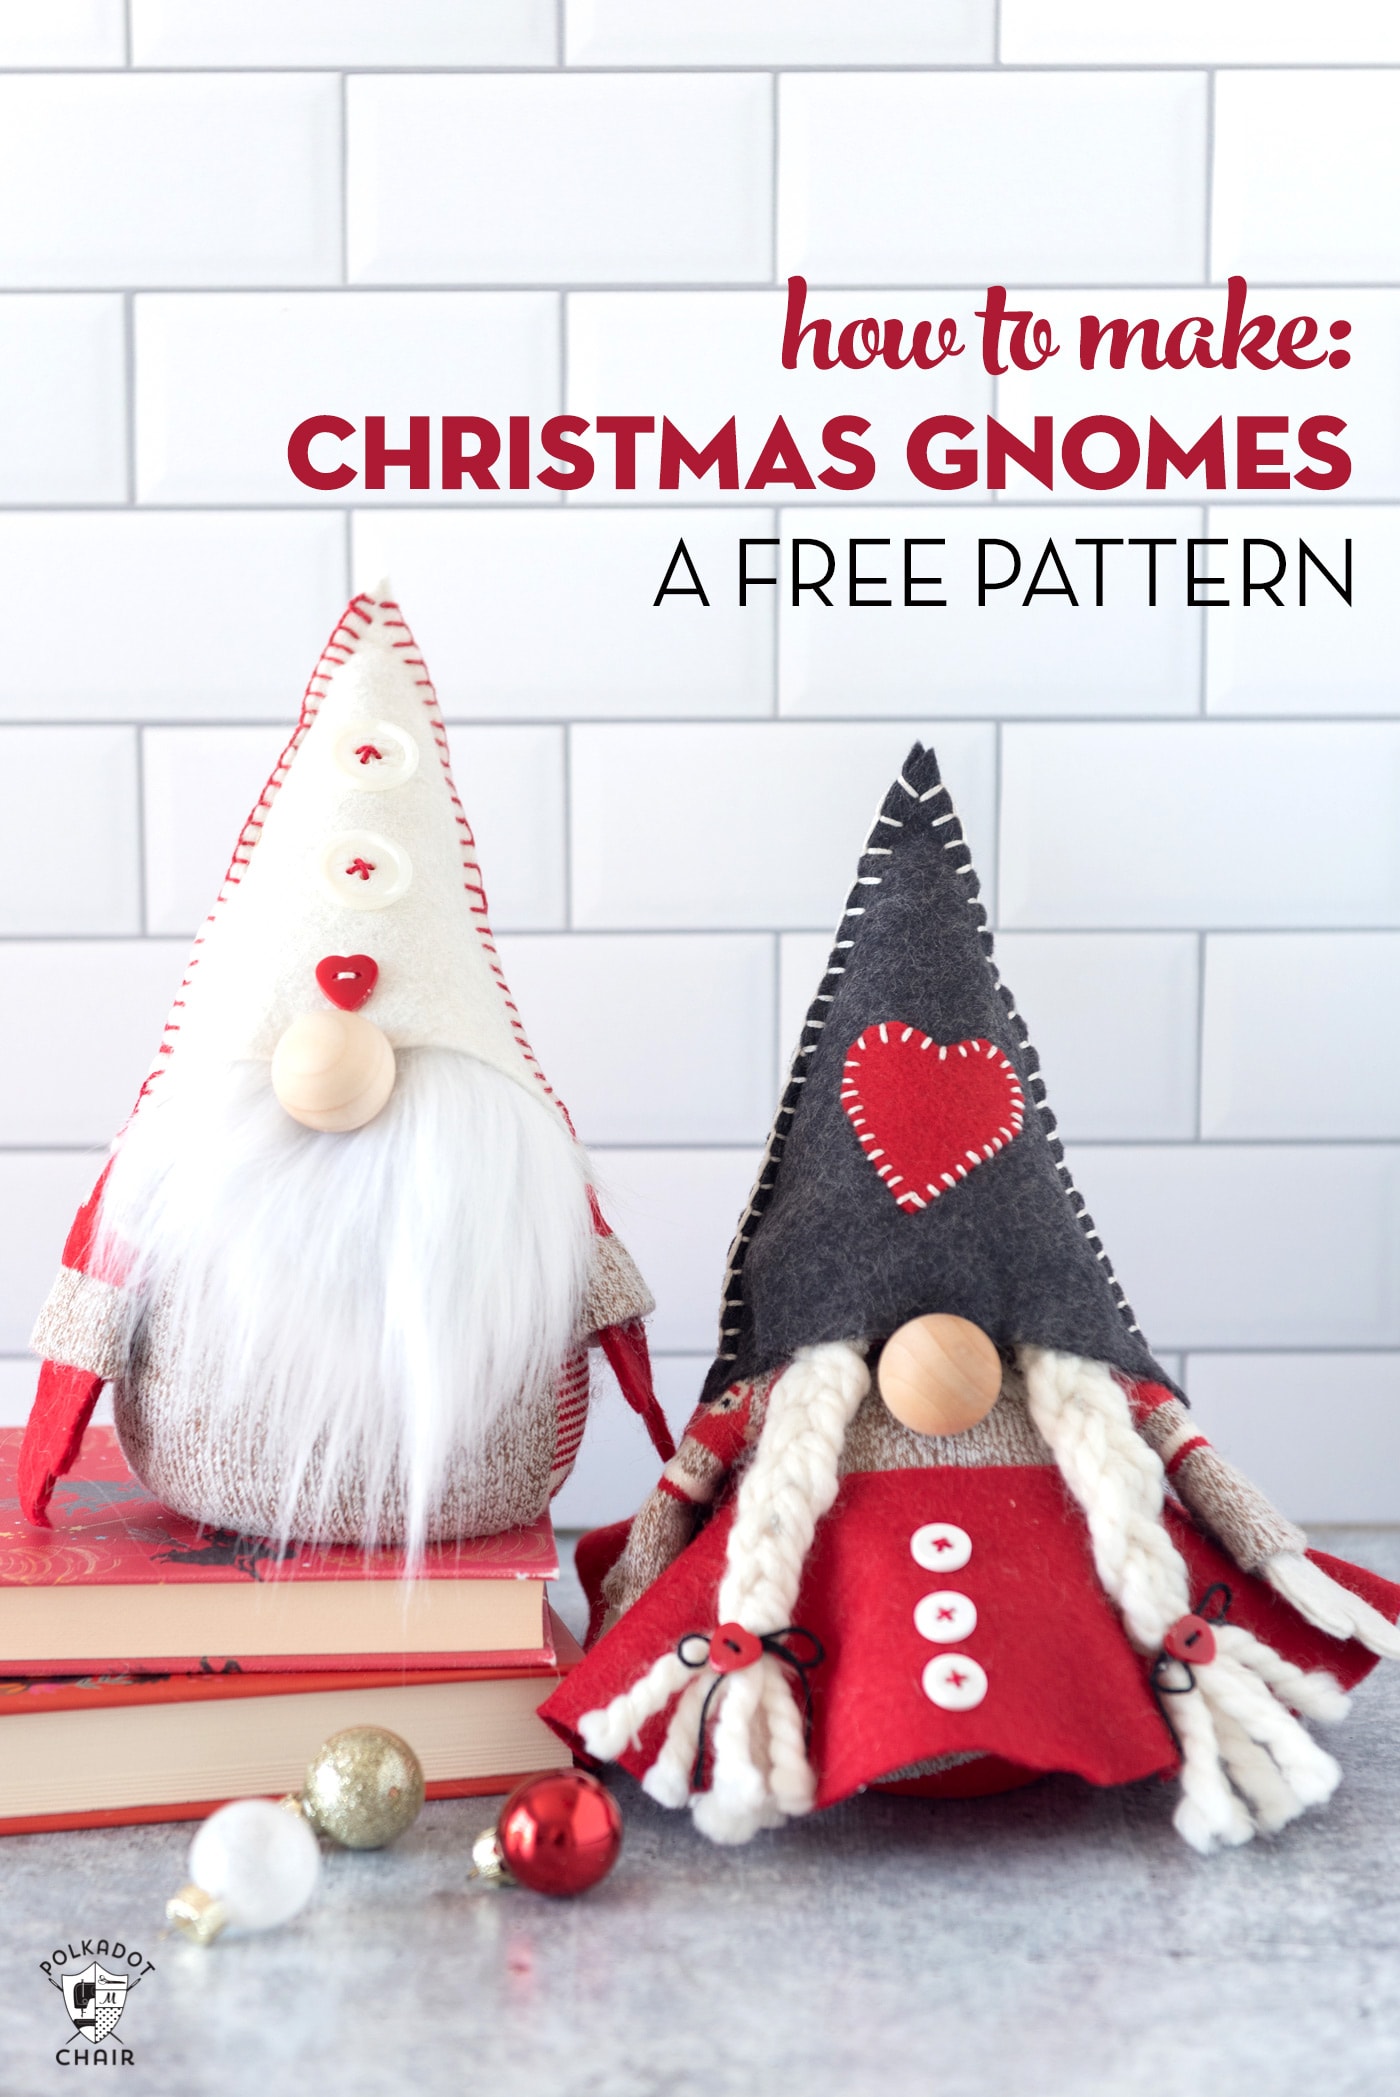 https://www.polkadotchair.com/wp-content/uploads/2021/12/how-to-make-christmas-gnomes-free-pattern.jpg